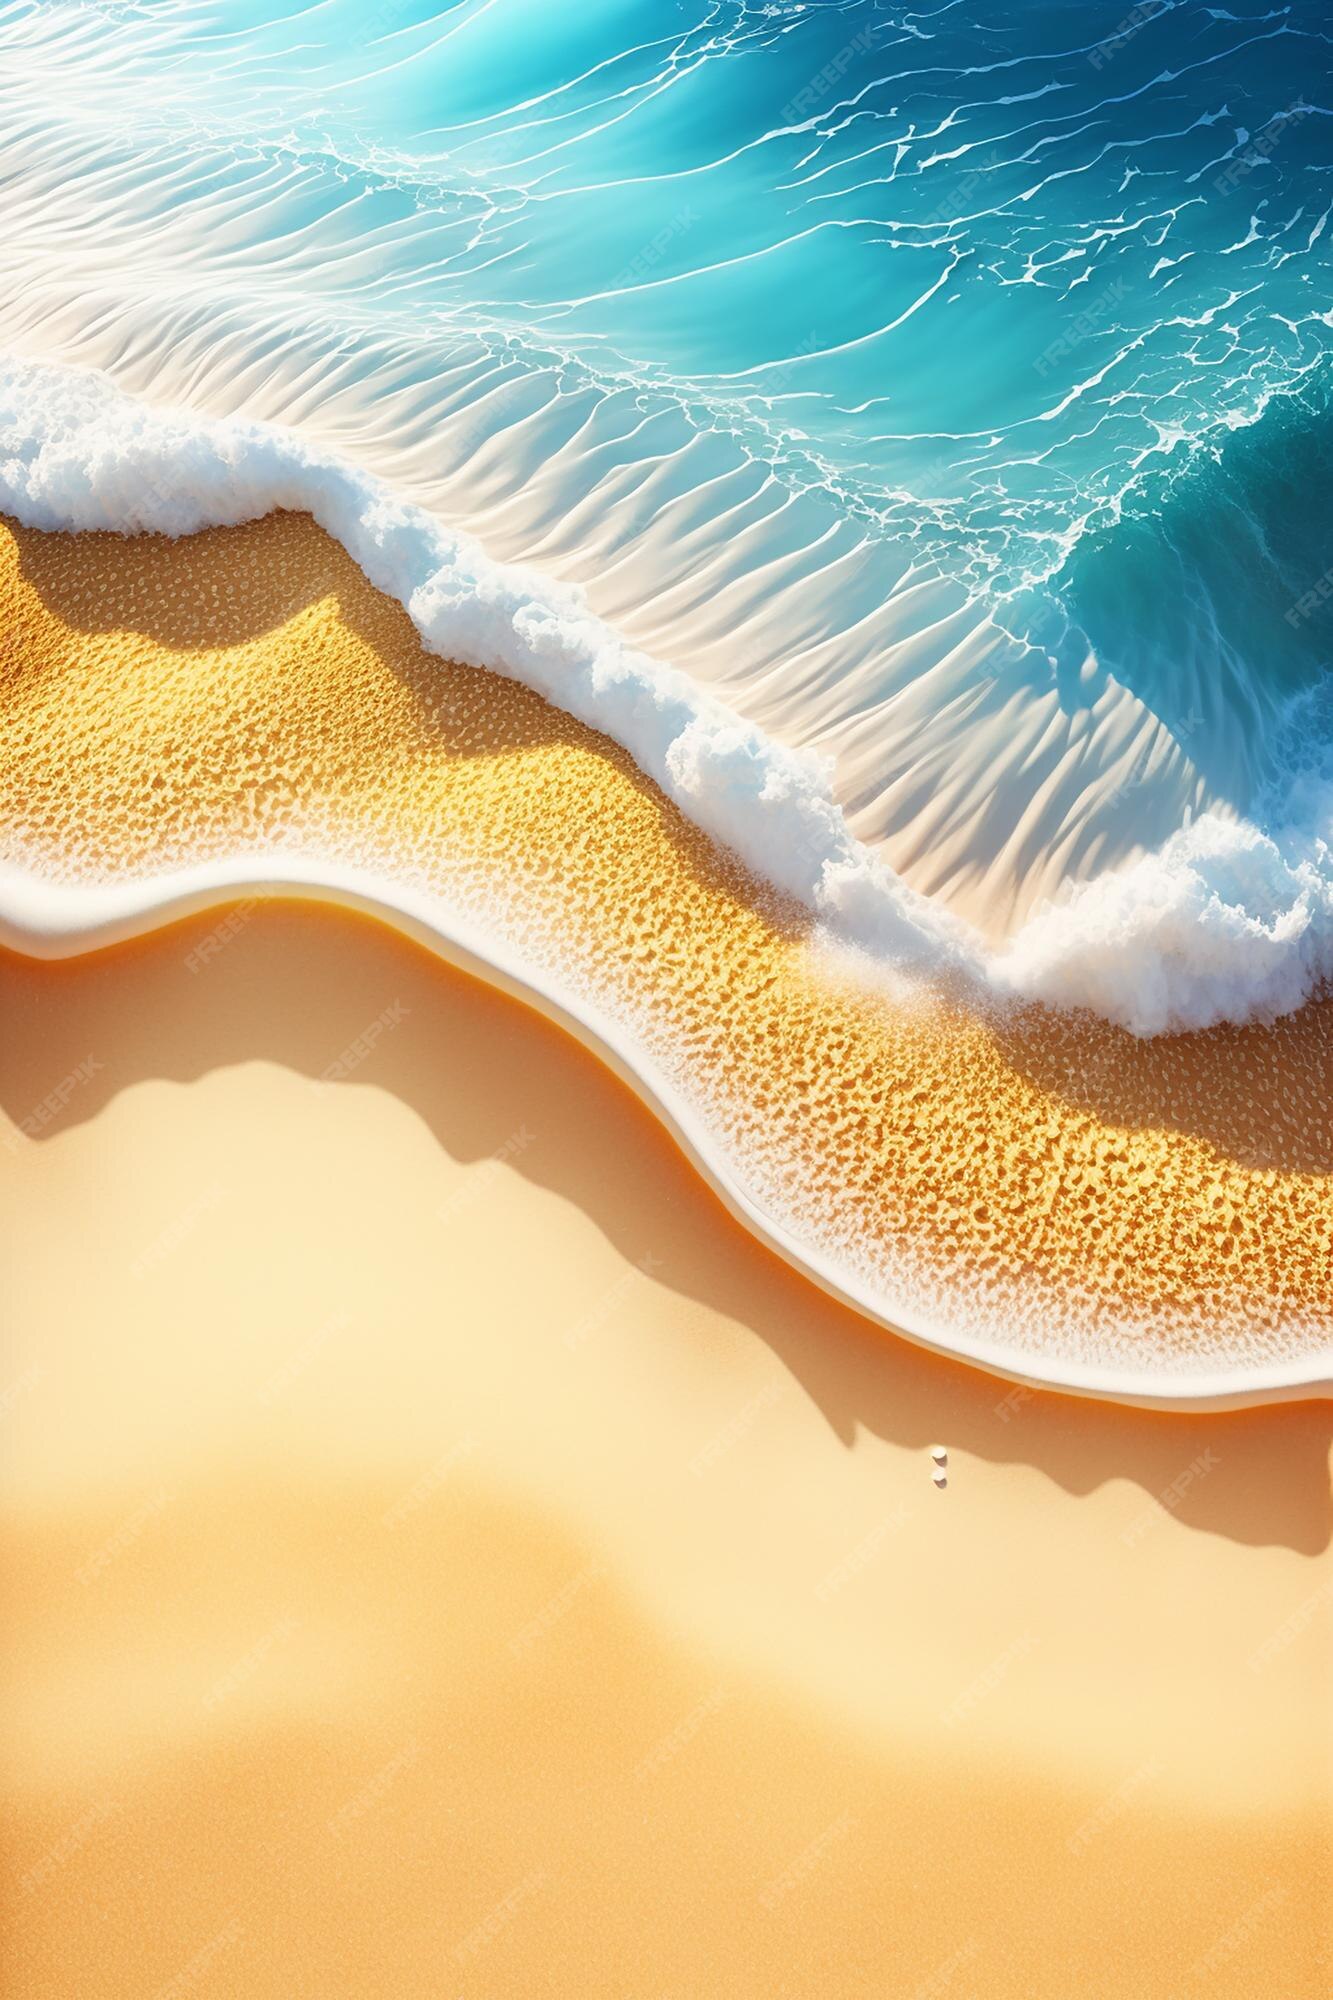 Premium Photo. The beach wallpaper iphone is the best high definition iphone wallpaper in you can make this wallpaper for your iphone x background, mobile screensaver, or ipad lock screen iphone